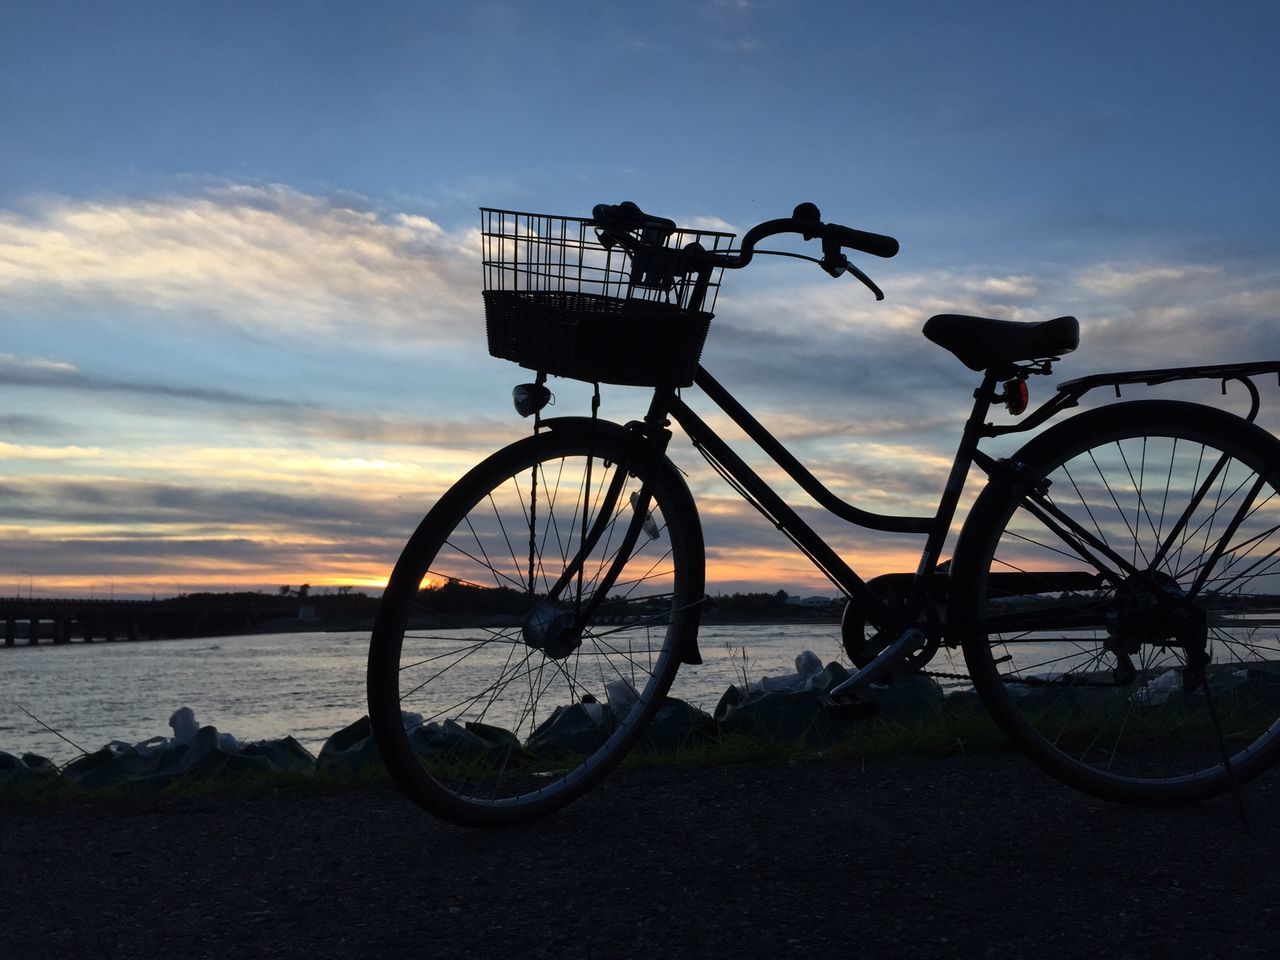 bicycle, transportation, mode of transport, water, sky, land vehicle, sunset, stationary, parking, silhouette, parked, sea, cloud - sky, river, railing, tranquility, tranquil scene, outdoors, nautical vessel, travel